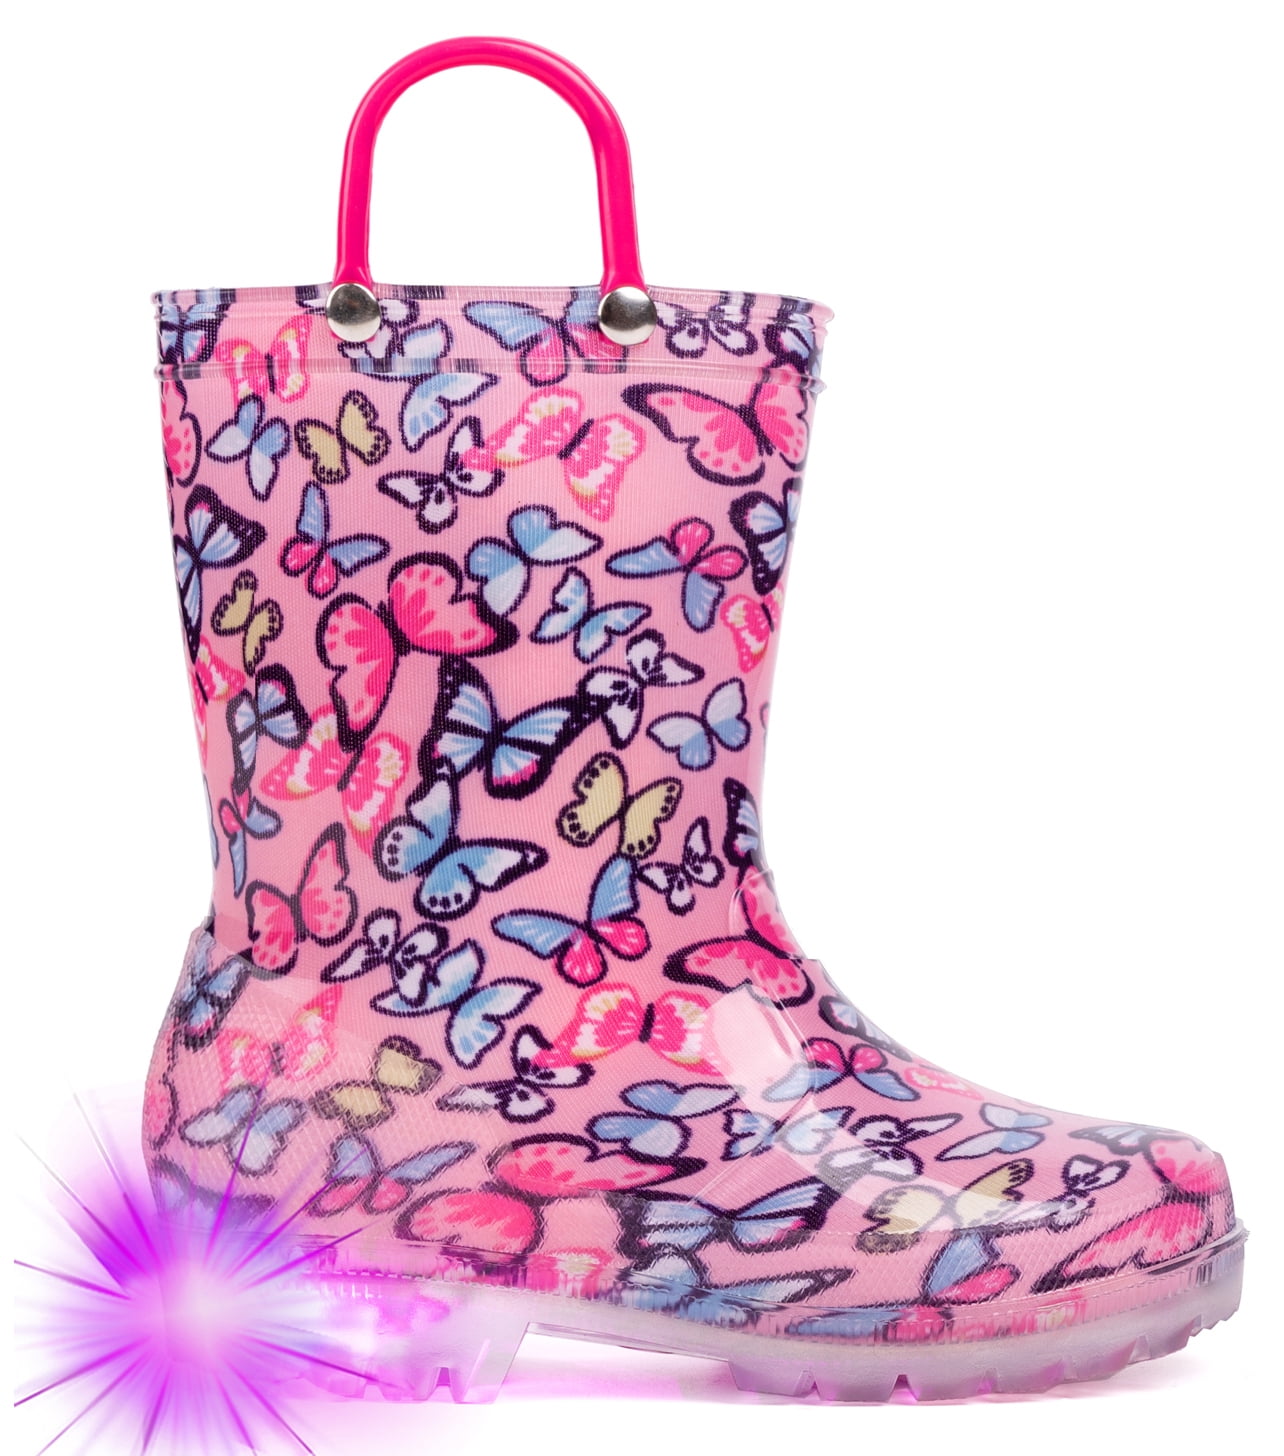 EUXTERPA Toddler-Kids Waterproof Light Up Rain Boots Patterns and Glitter Boots with Handles for Boys and Girls 